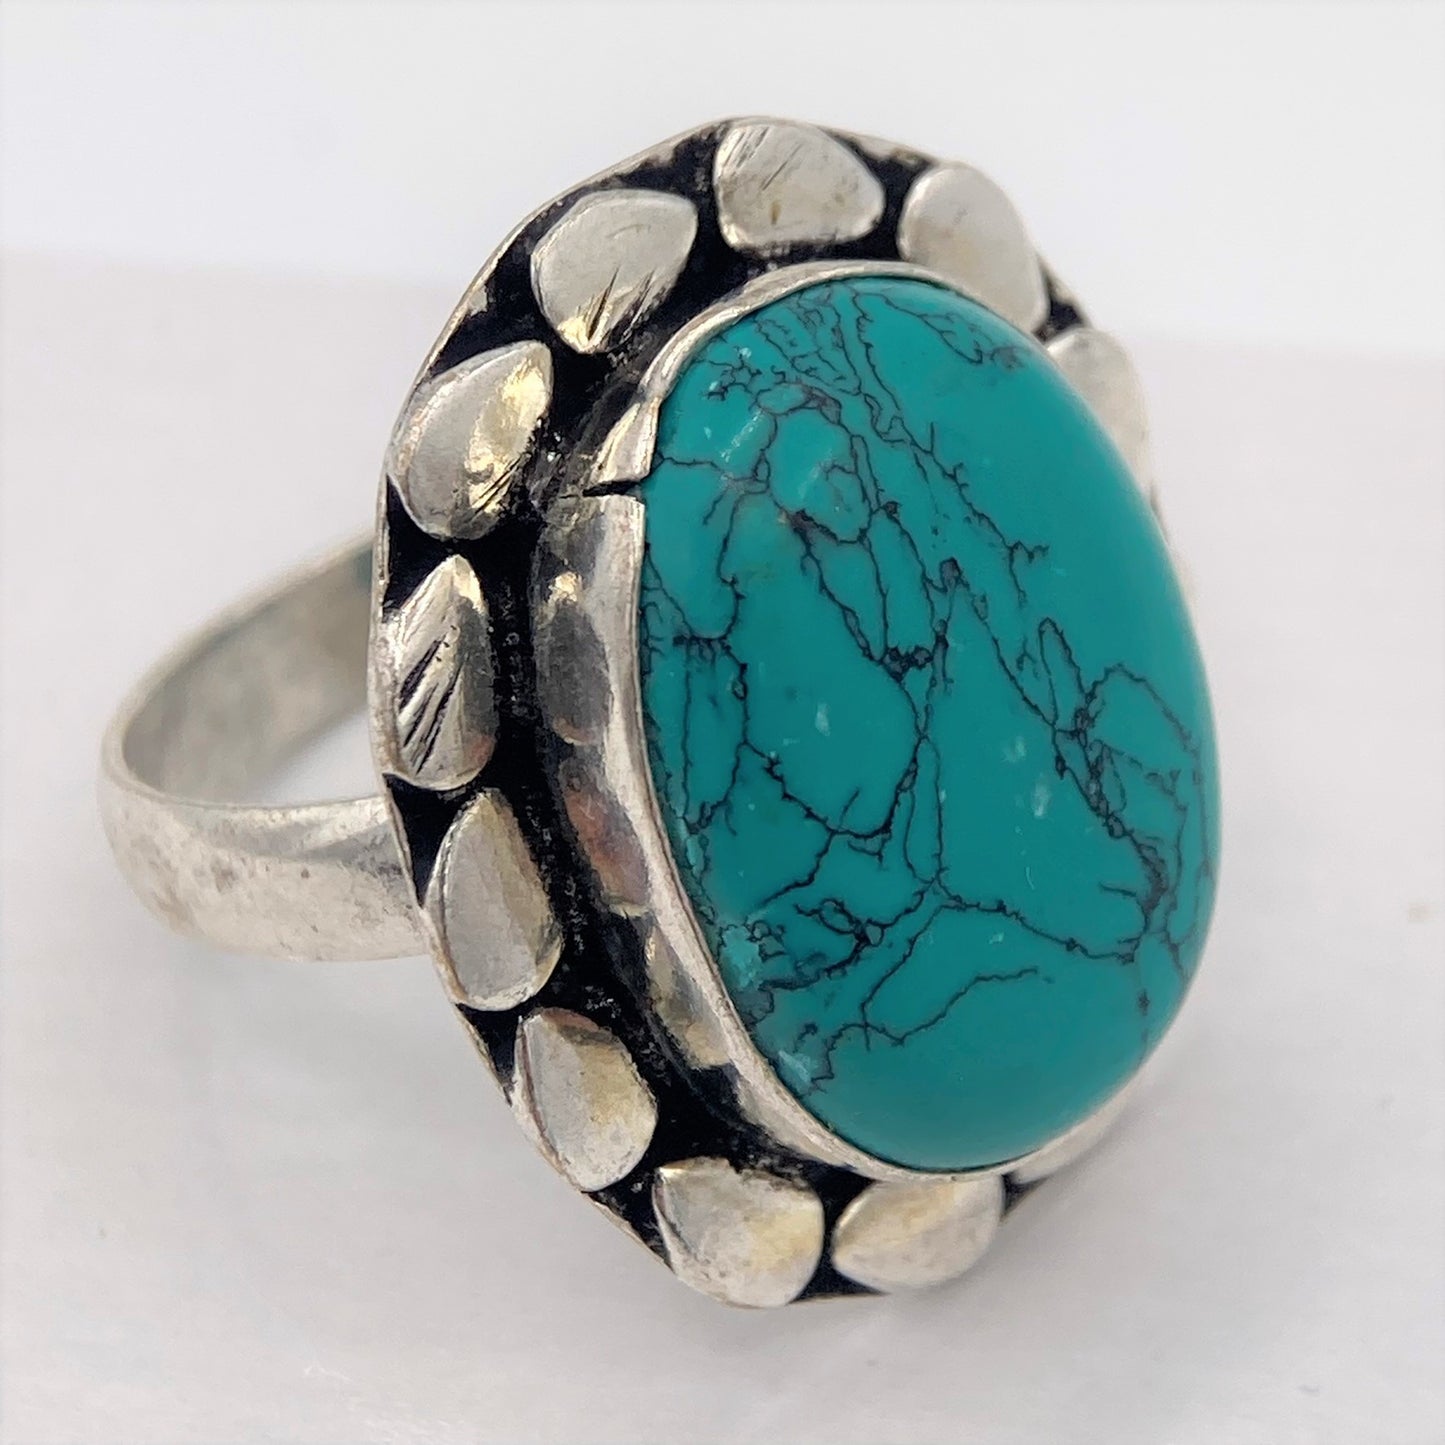 Silver plated with turquoise looking stone (not real) - costume jewelry